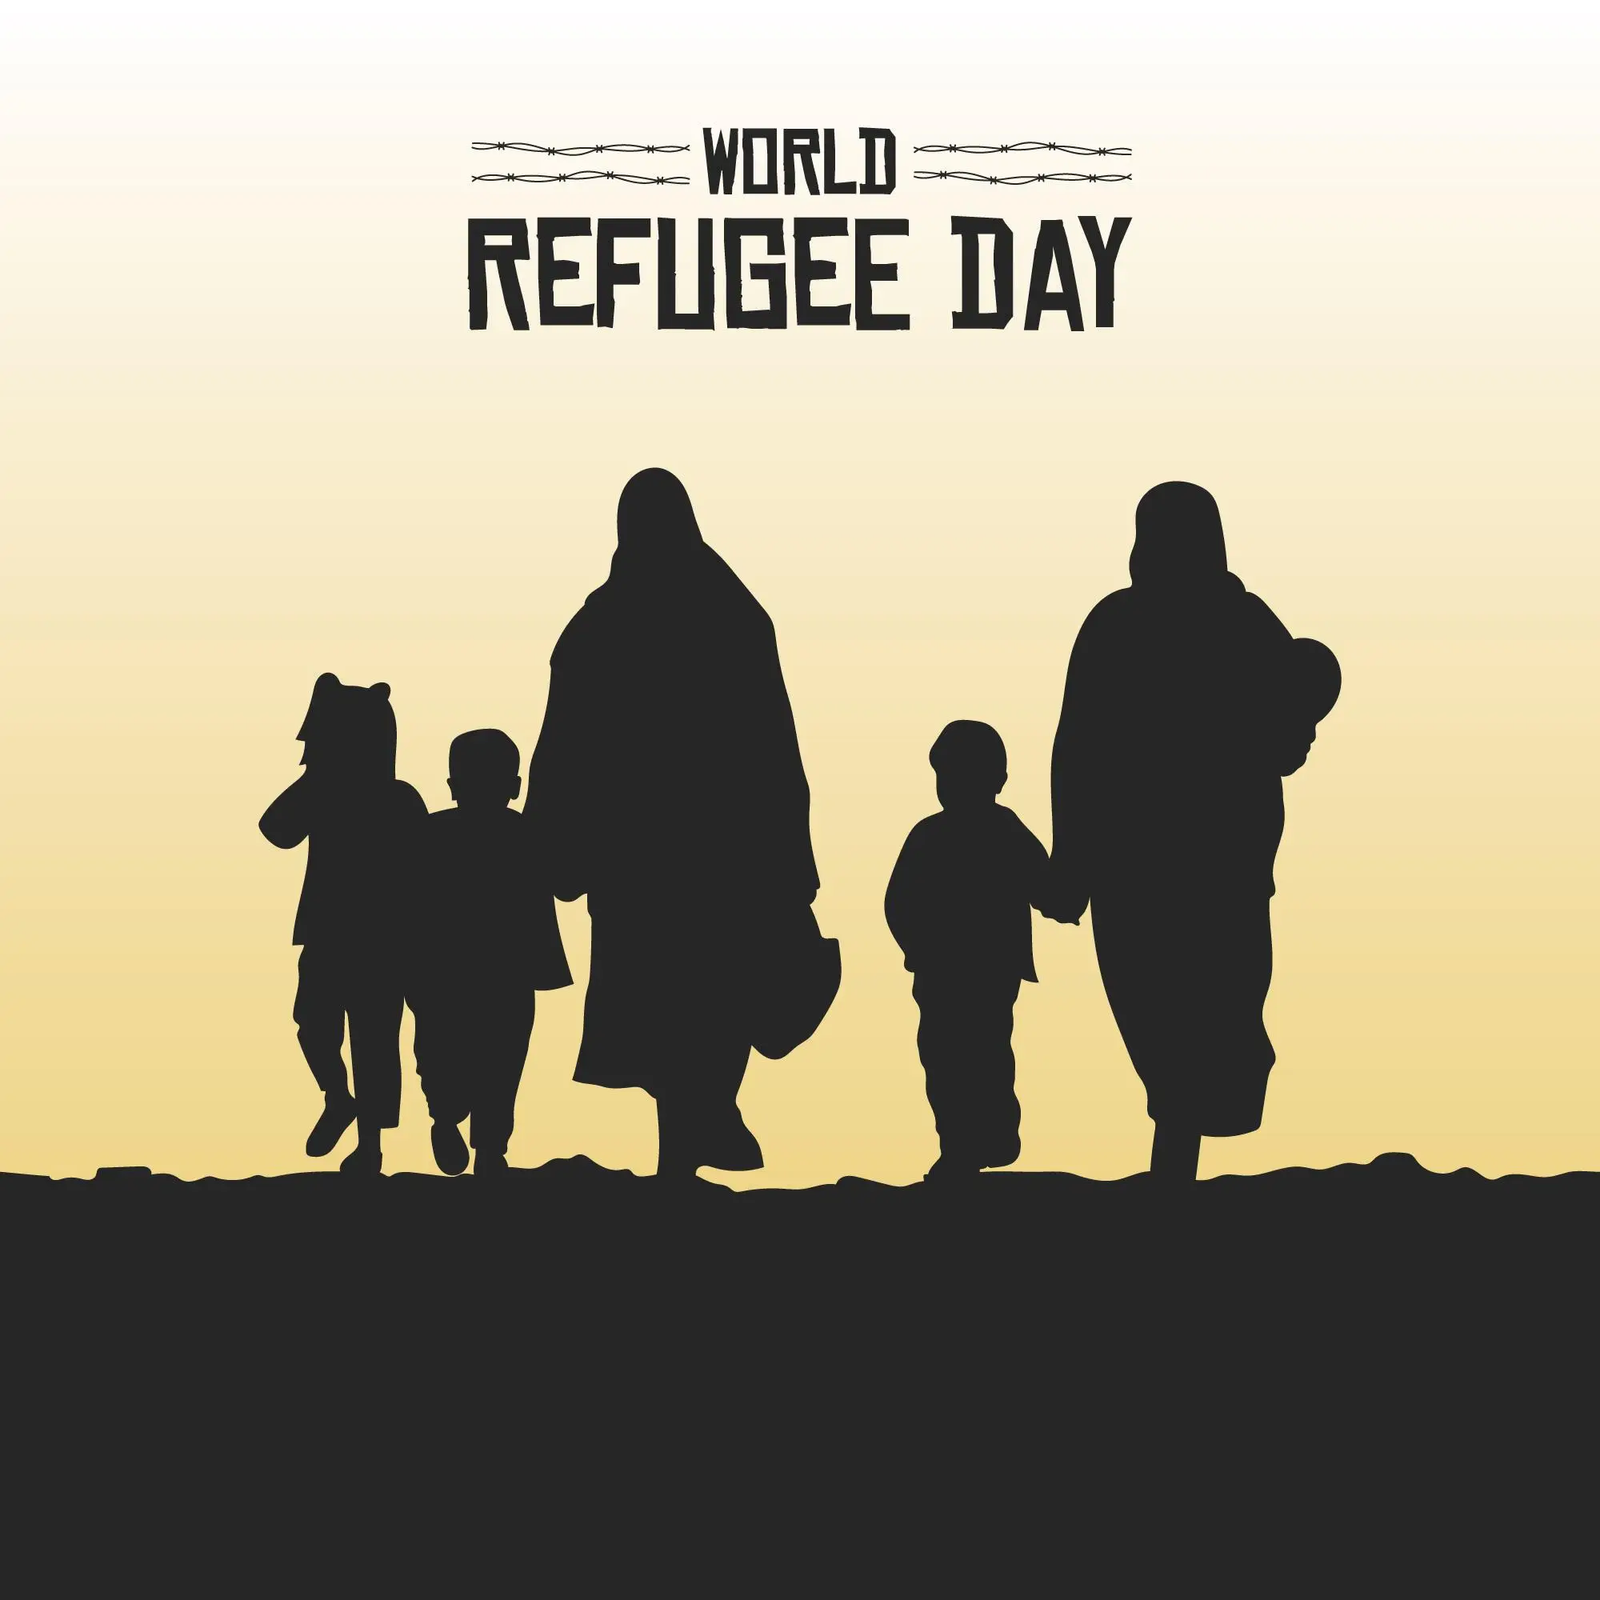 THE IRONY OF WORLD REFUGEE DAY: CELEBRATING, THEN BLAMING THE VICTIMS